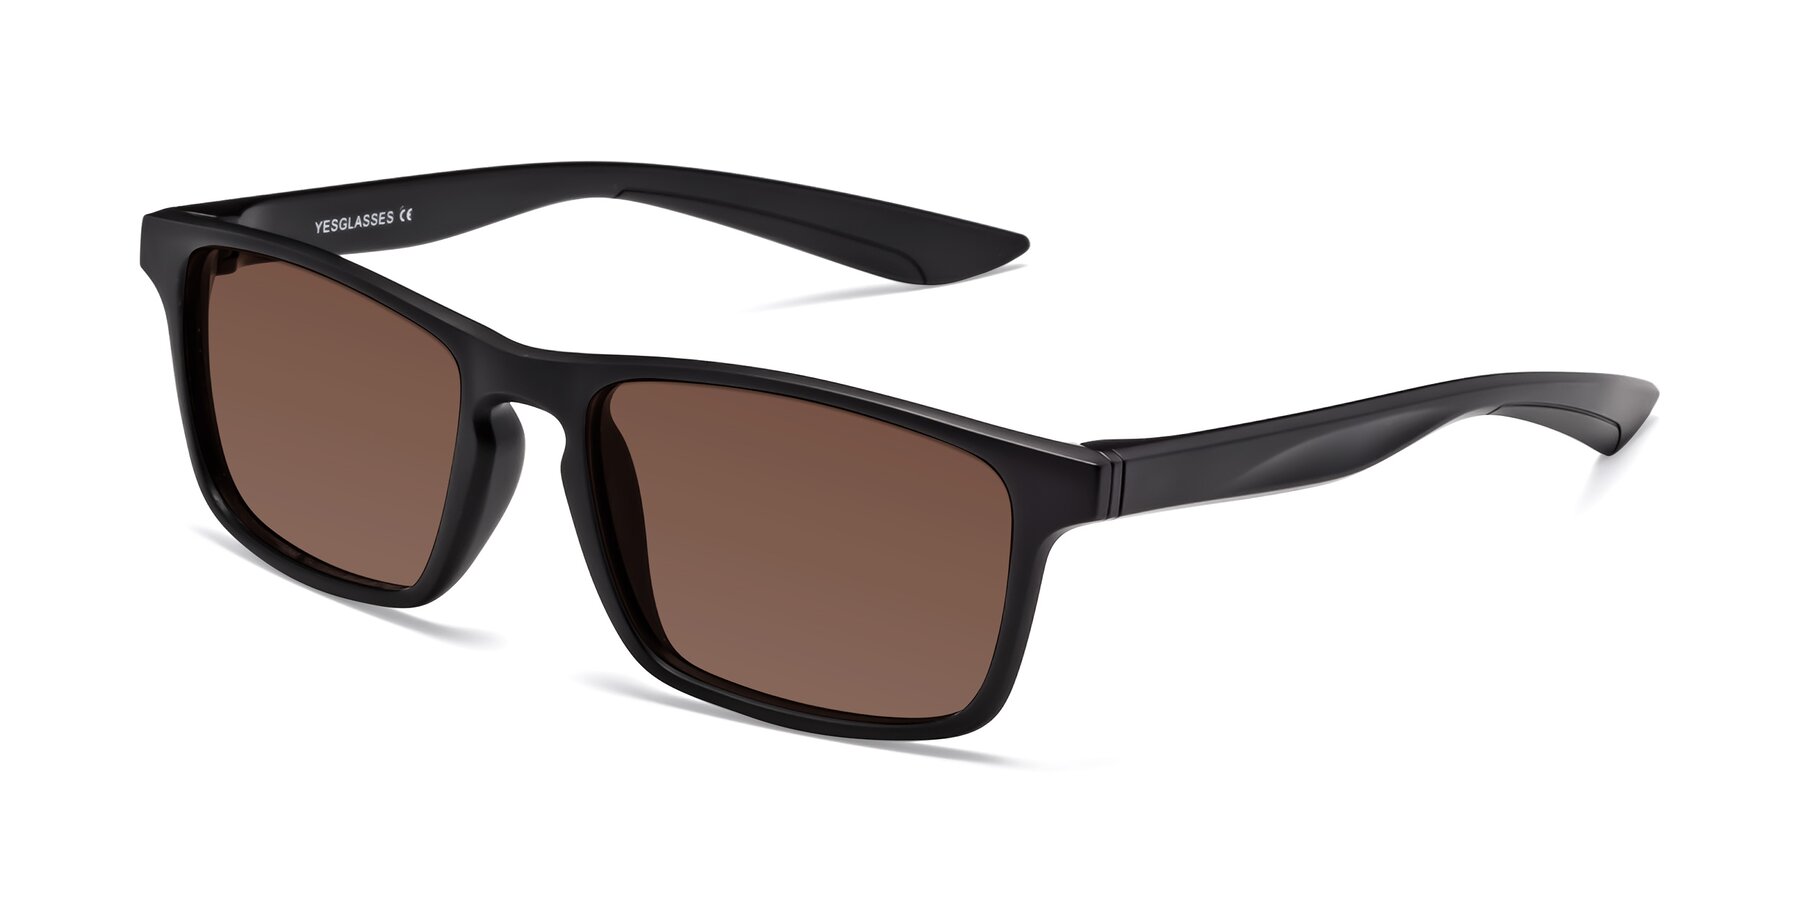 Angle of Passion in Matte Black with Brown Tinted Lenses